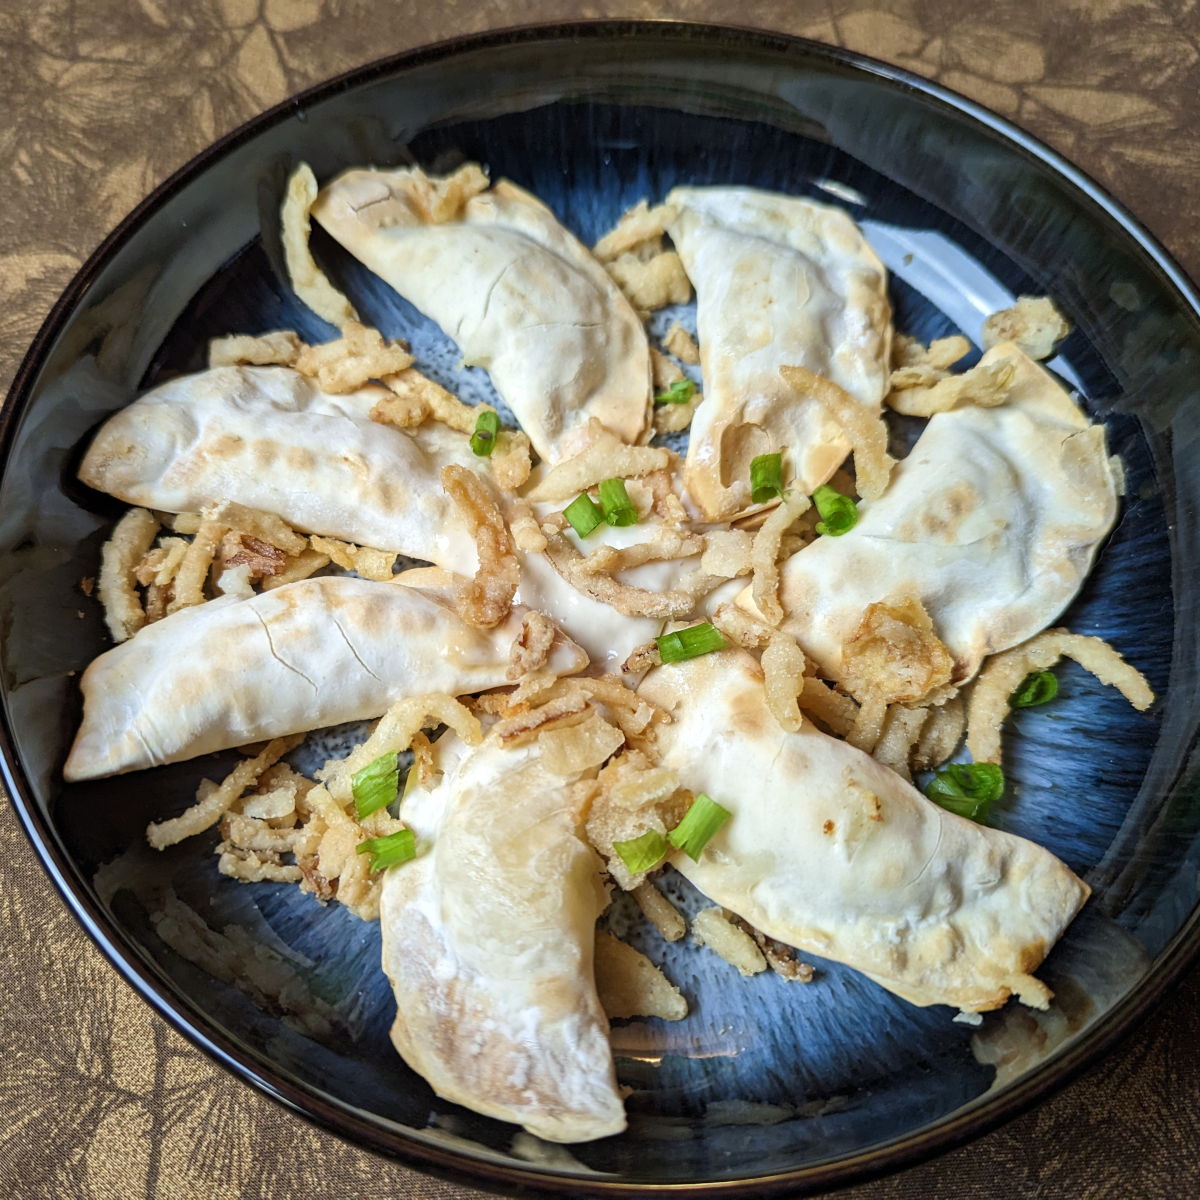 Mashed potato air fryer perogies garnished with green onion and crispy fried onions.